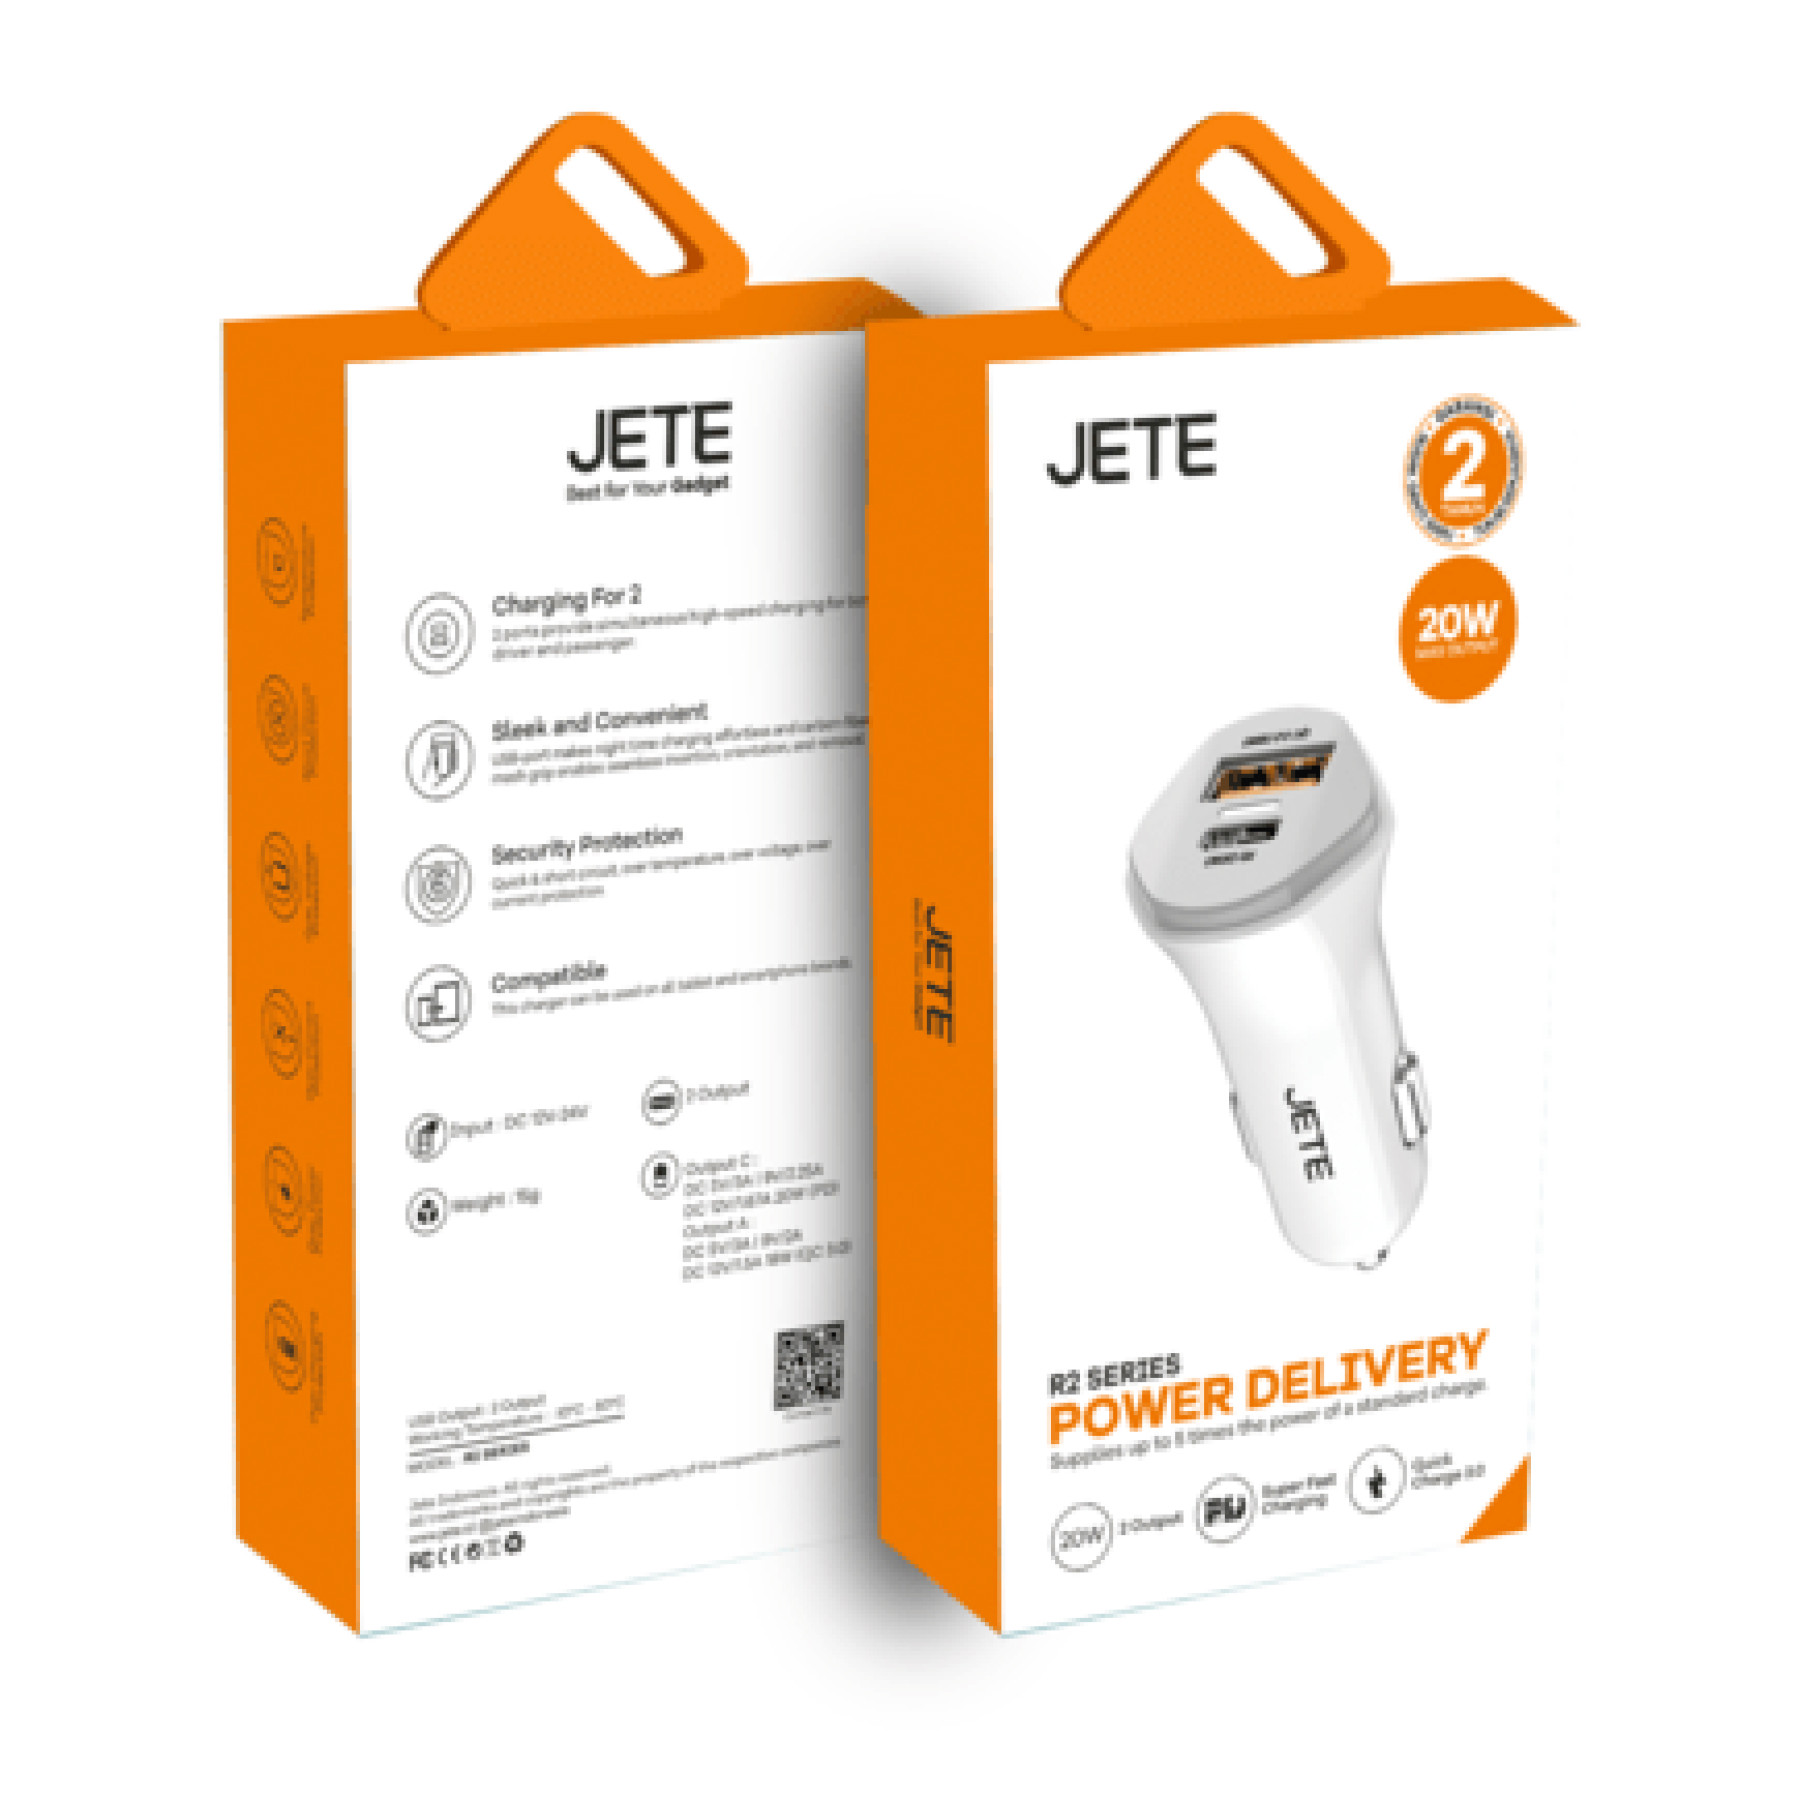 Car Charger Jete R2 Dual USB+Type-C 20W with Type-C Cable